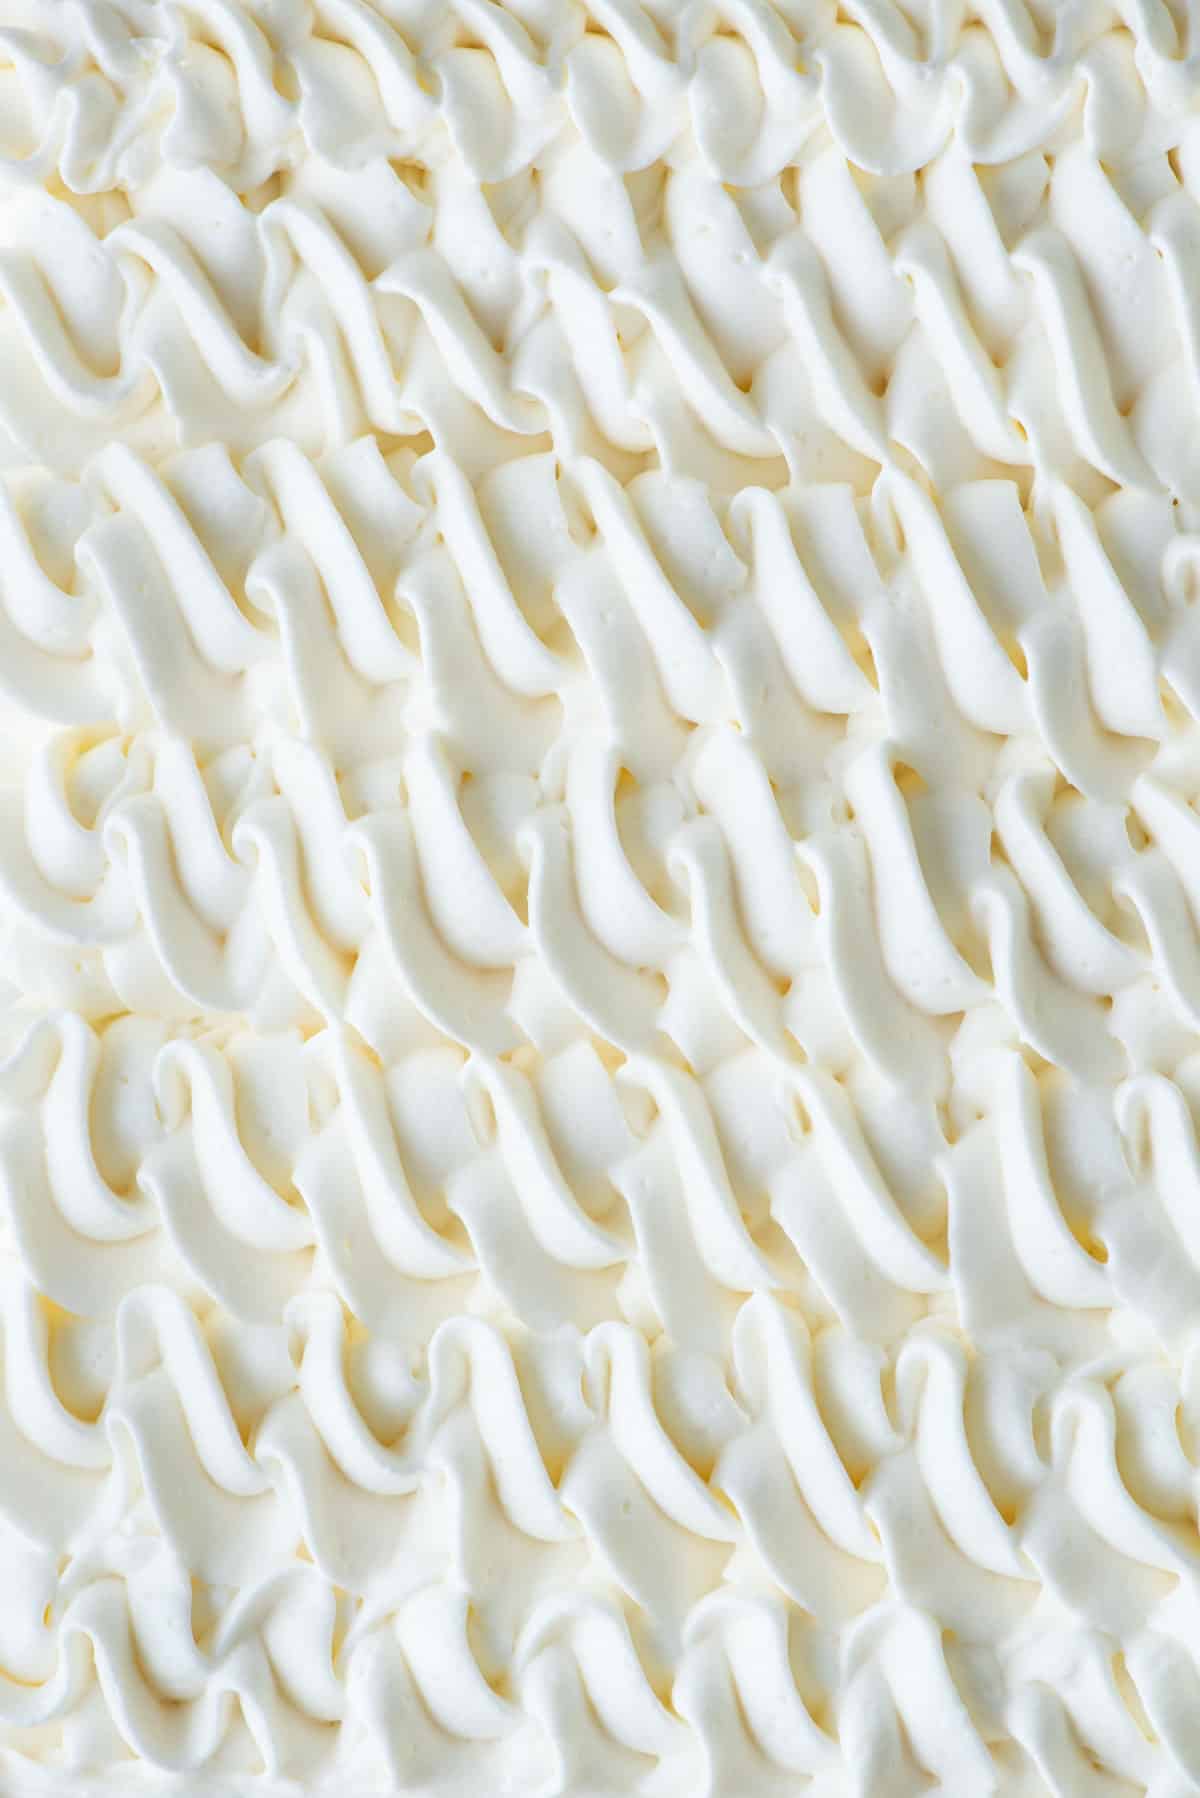 stabilized whipped cream piped into a pretty pattern